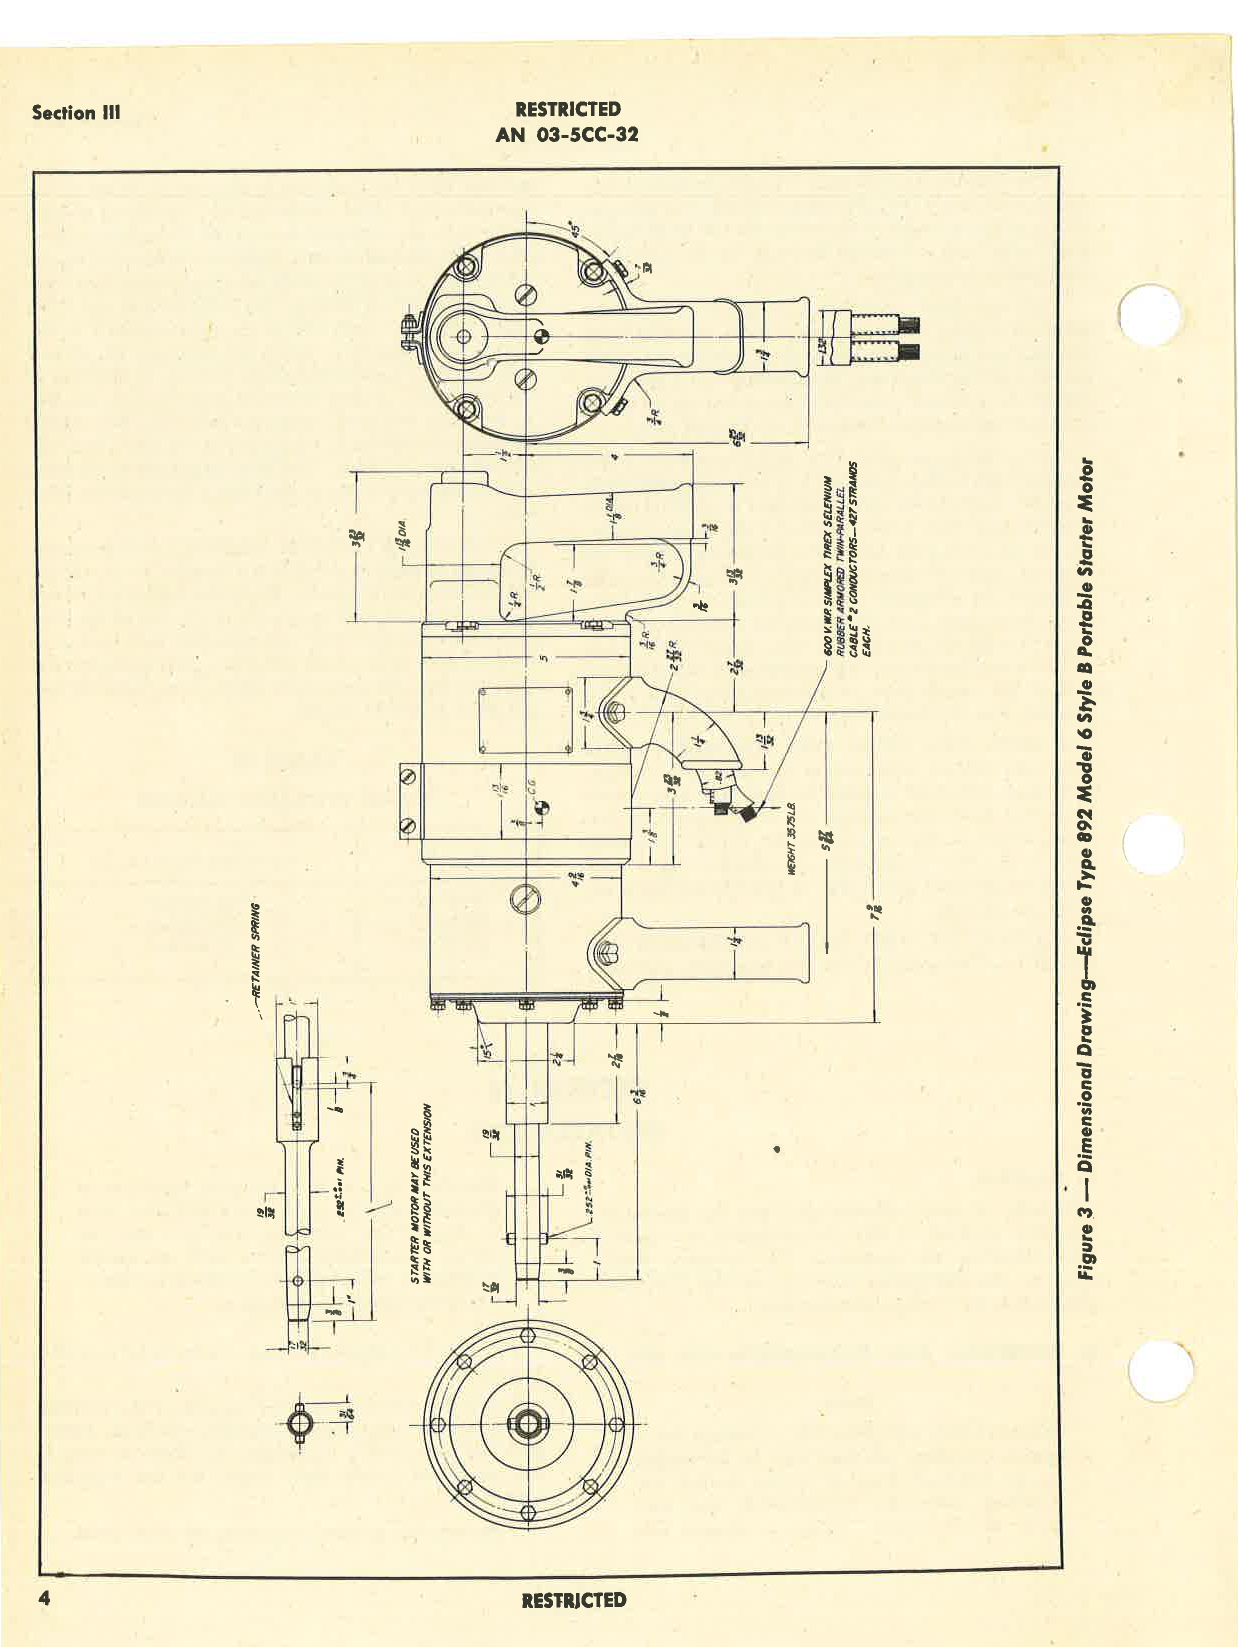 Sample page 8 from AirCorps Library document: Handbook of Instructions with Parts Catalog for Portable Starter Motor Type 892-6-B